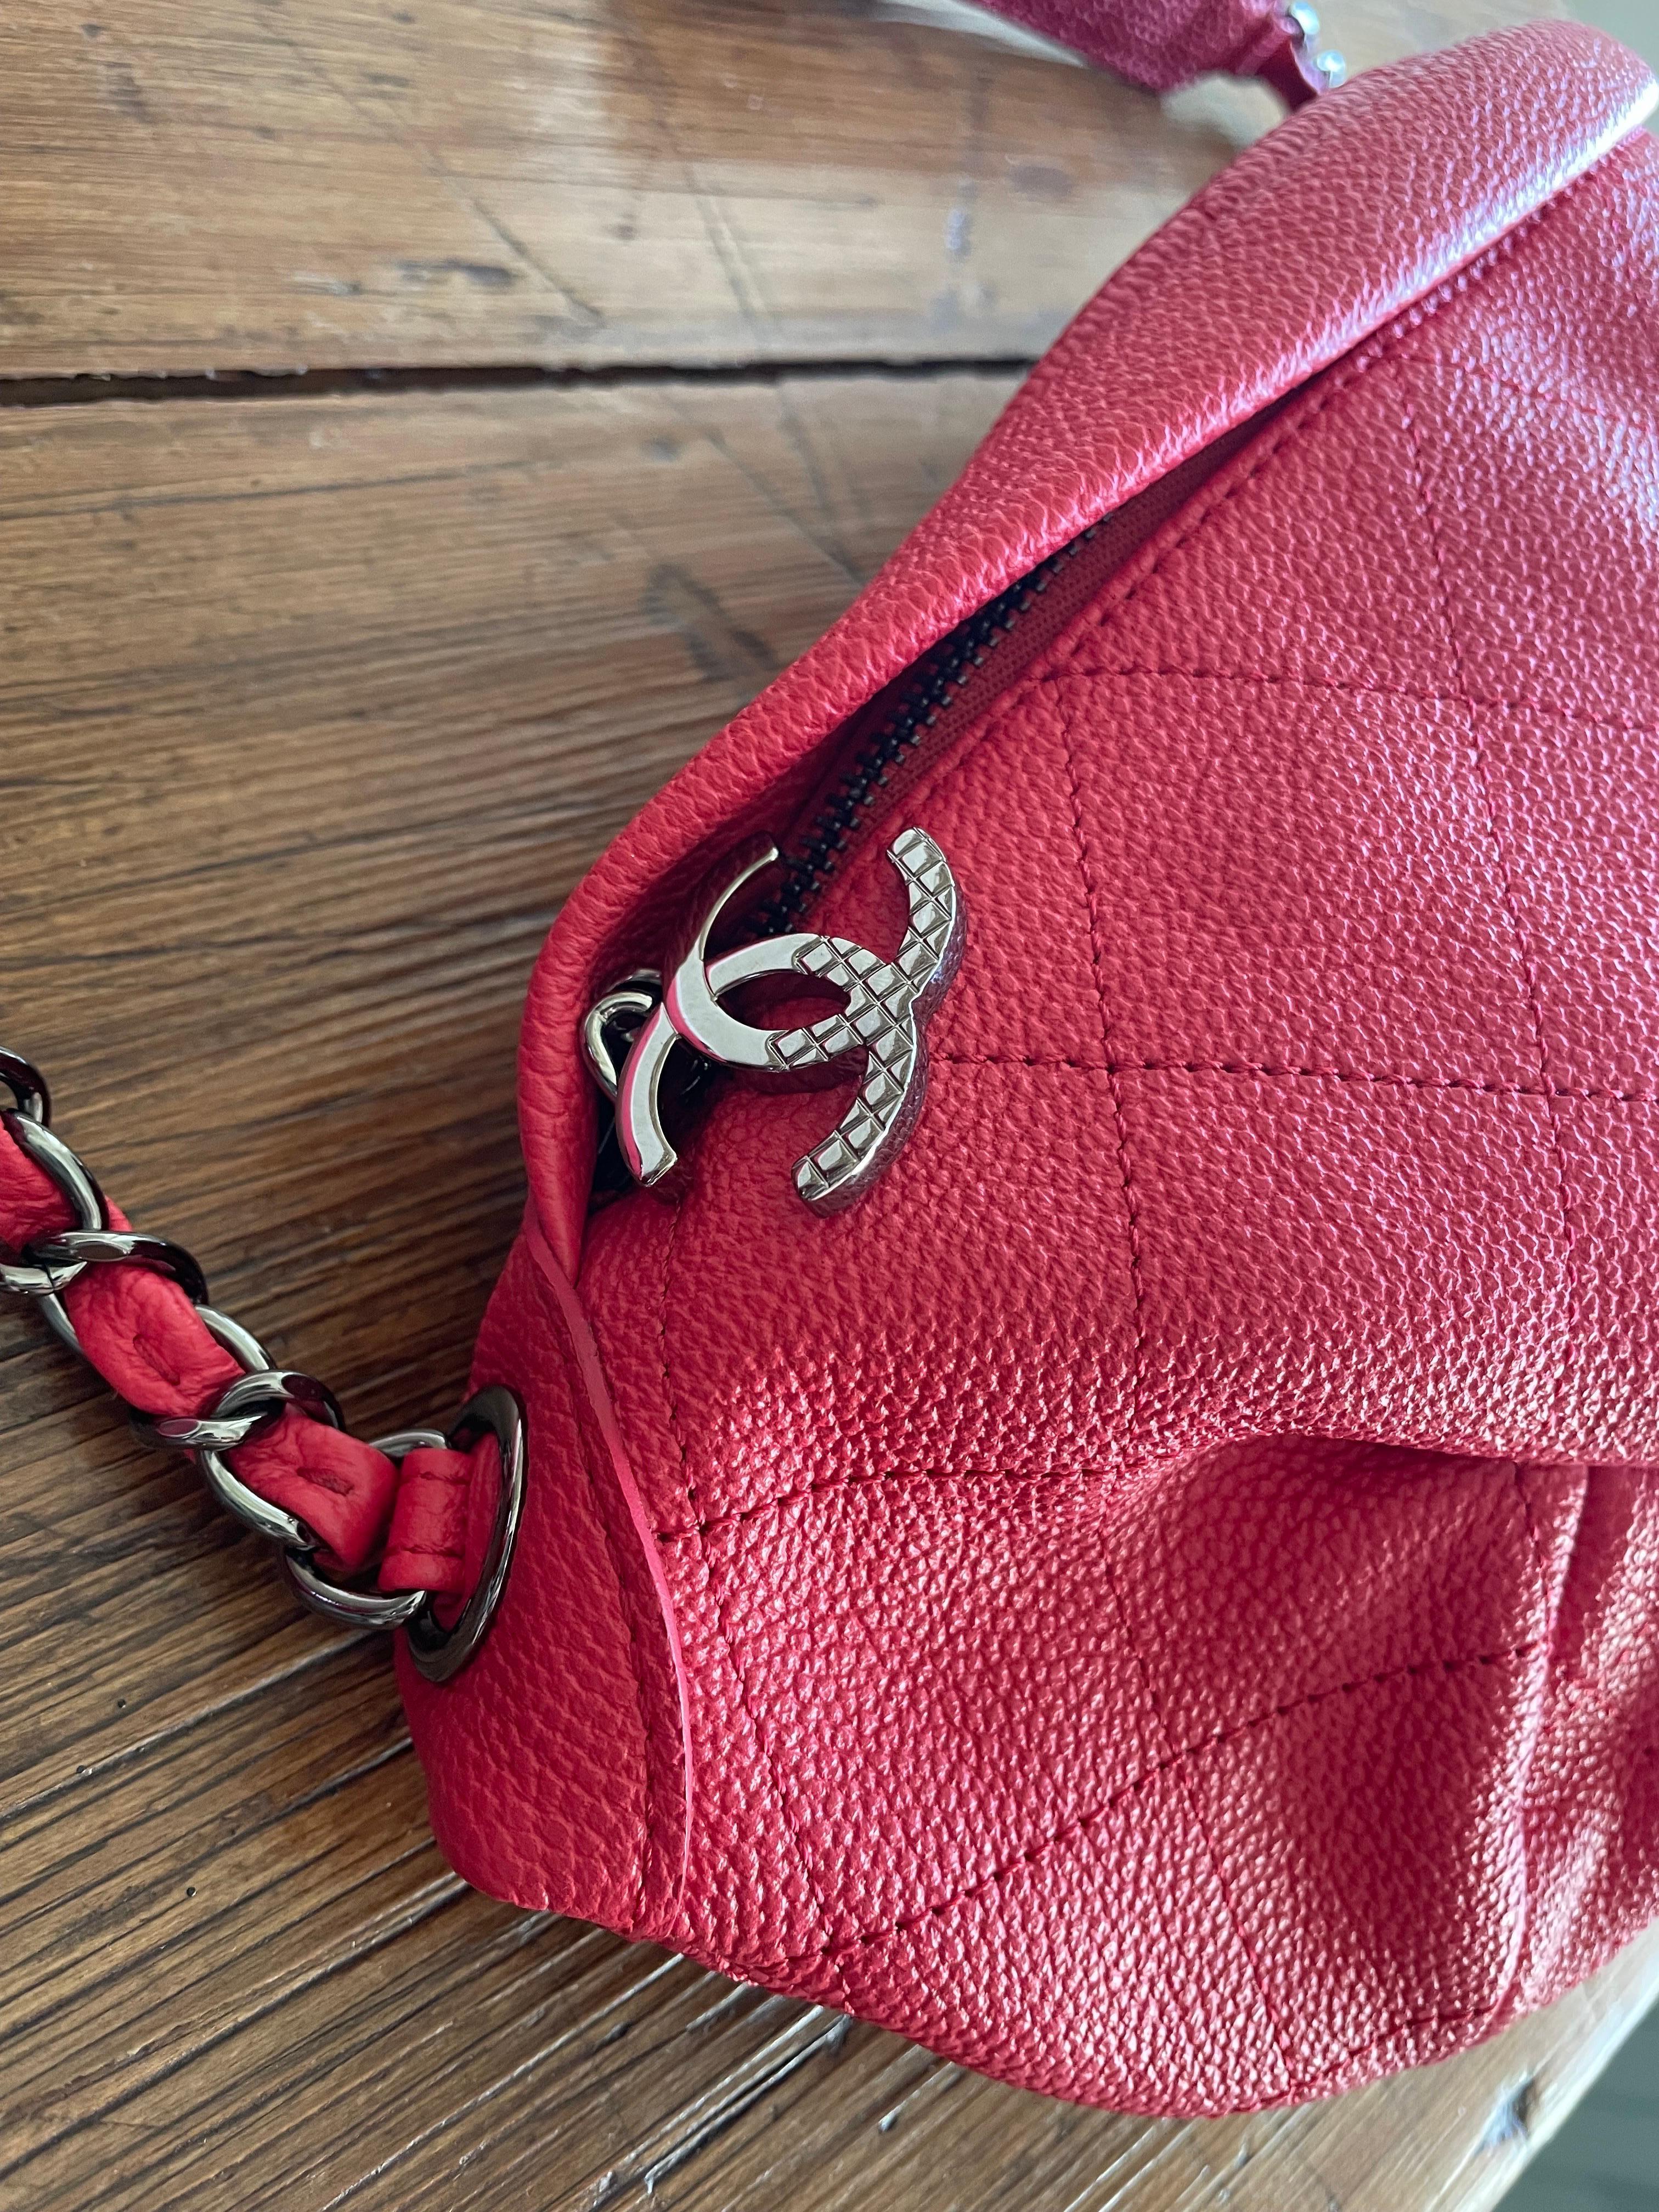 Coral red Chanel fanny pack with silver hardware. Zip closure and logo charm. Adjustable belt with part leather and part chain. Very soft and capacious. 30 cm wide, 18 cm high and 8 cm deep. In perfect condition with dust. 